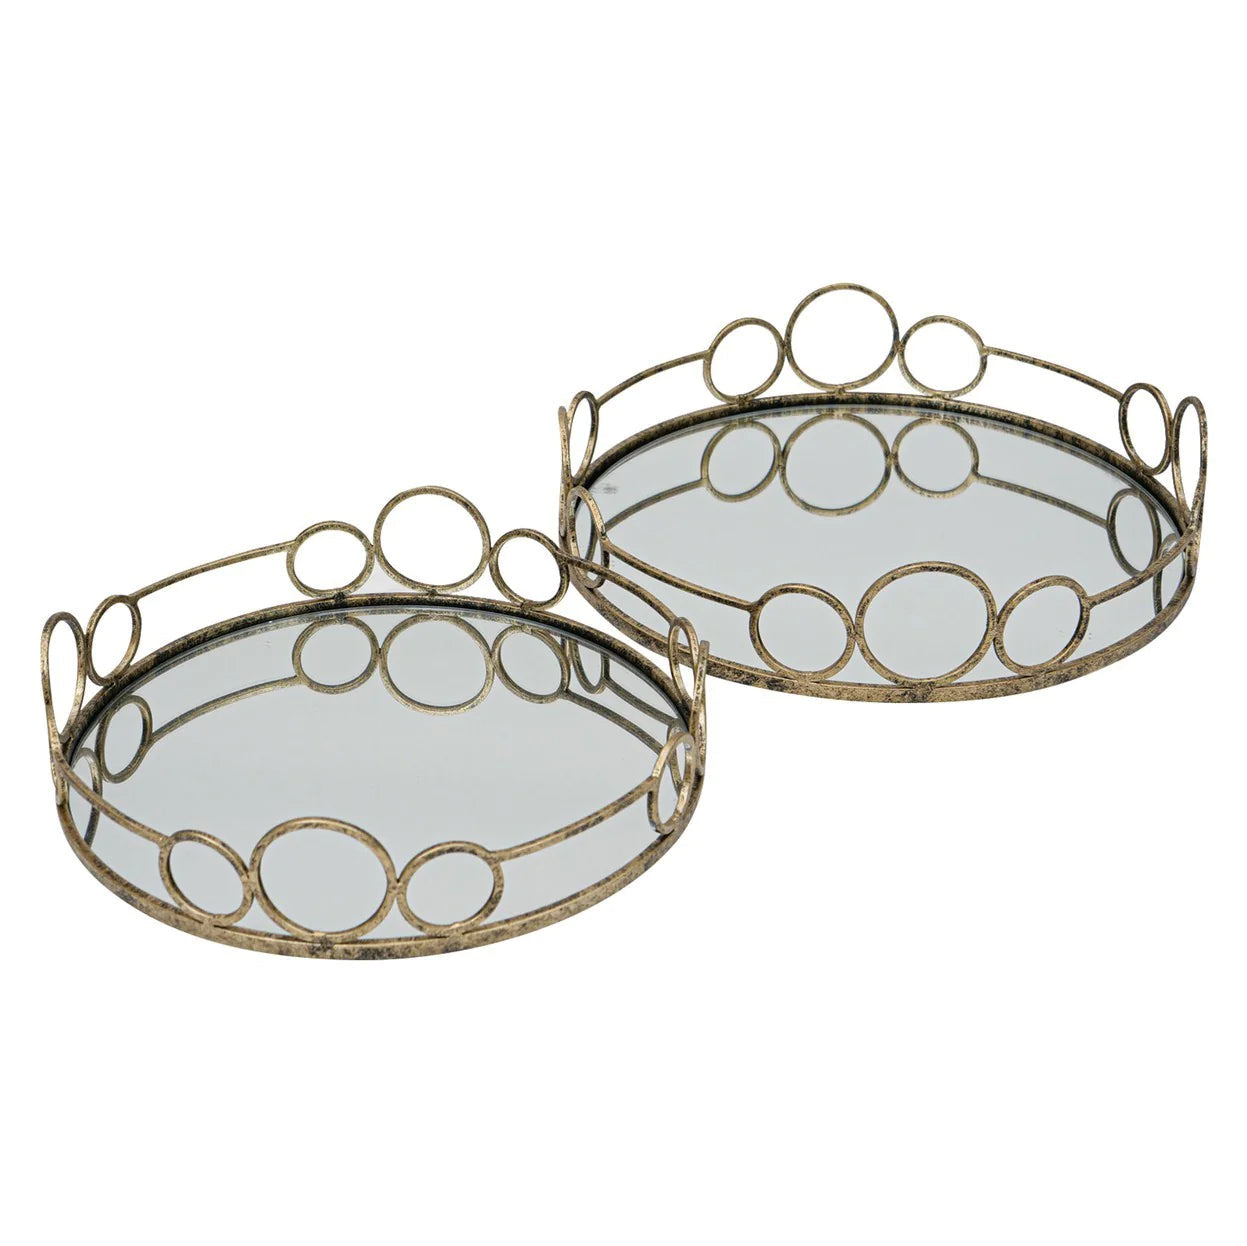 Remy Trays (Set of 2) - Antique Gold Finish